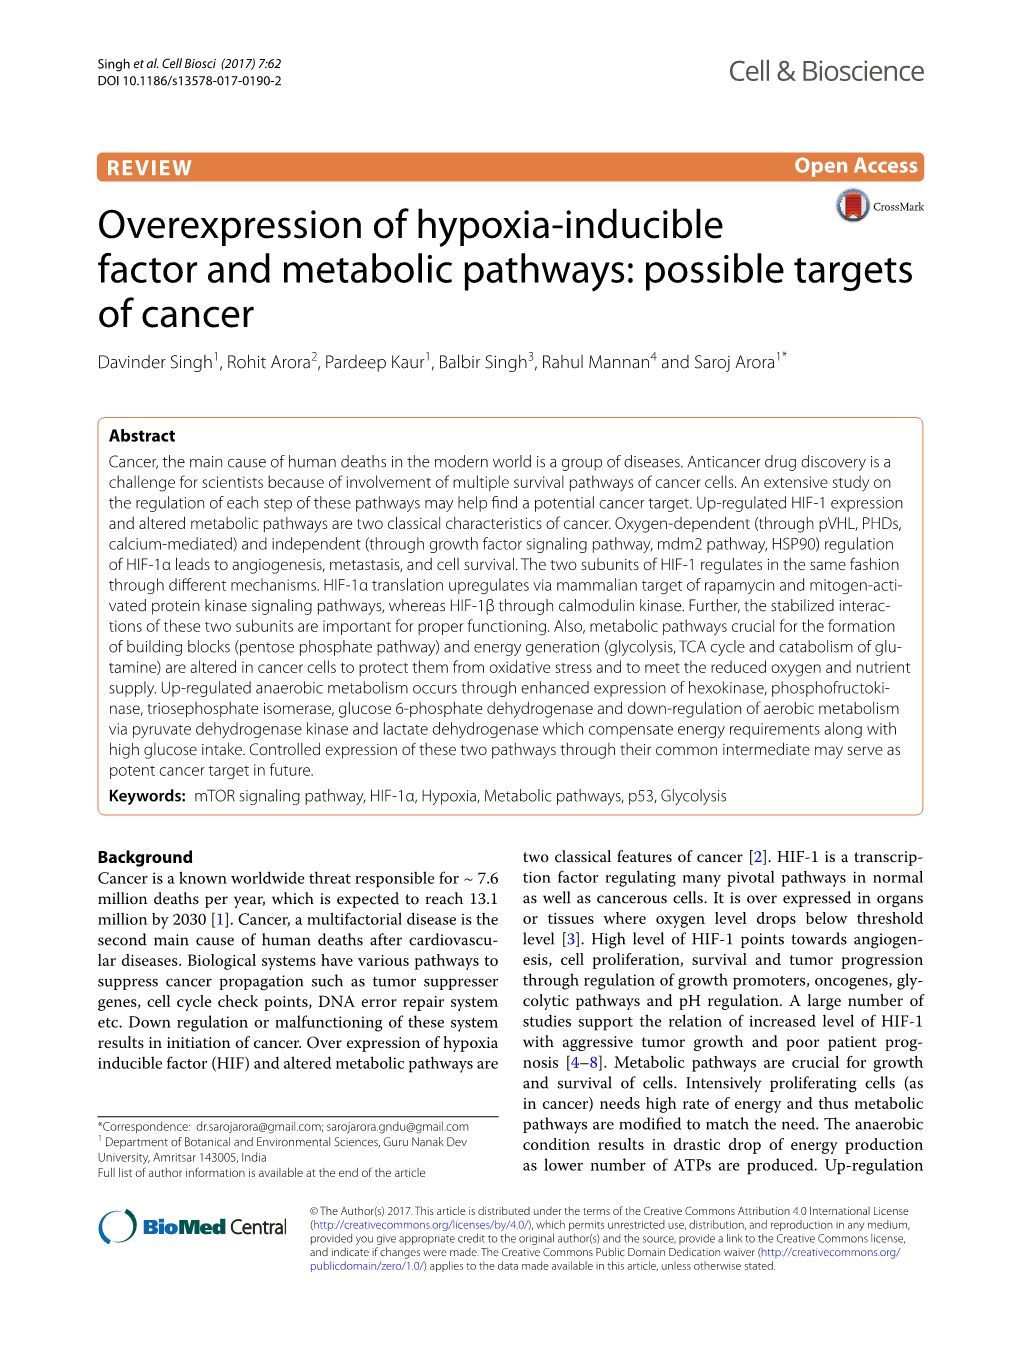 Overexpression of Hypoxia-Inducible Factor and Metabolic Pathways